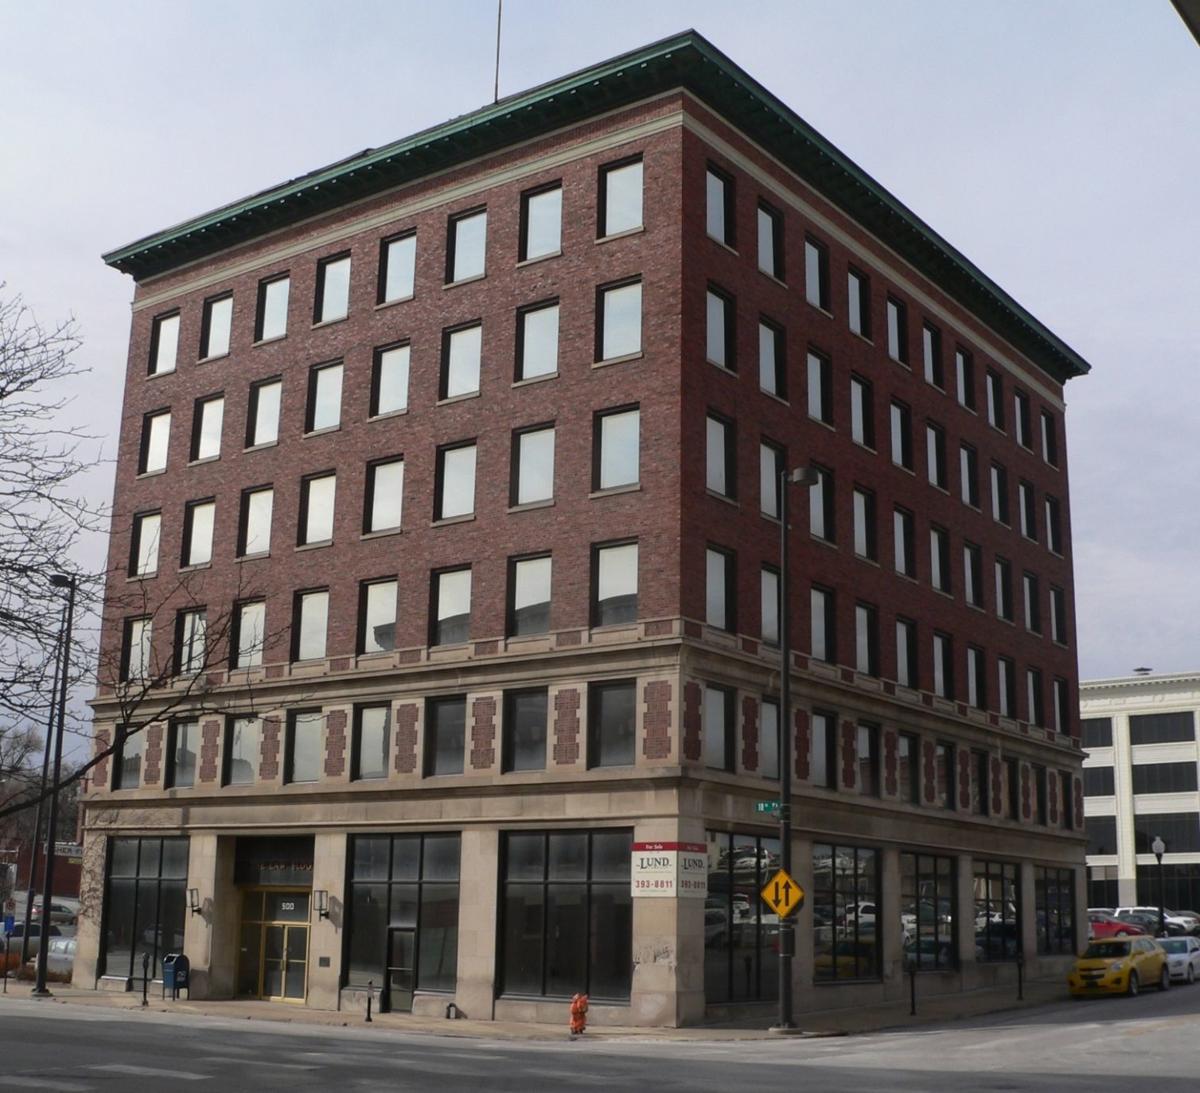 Historic Standard Oil Building To Become You Guessed It